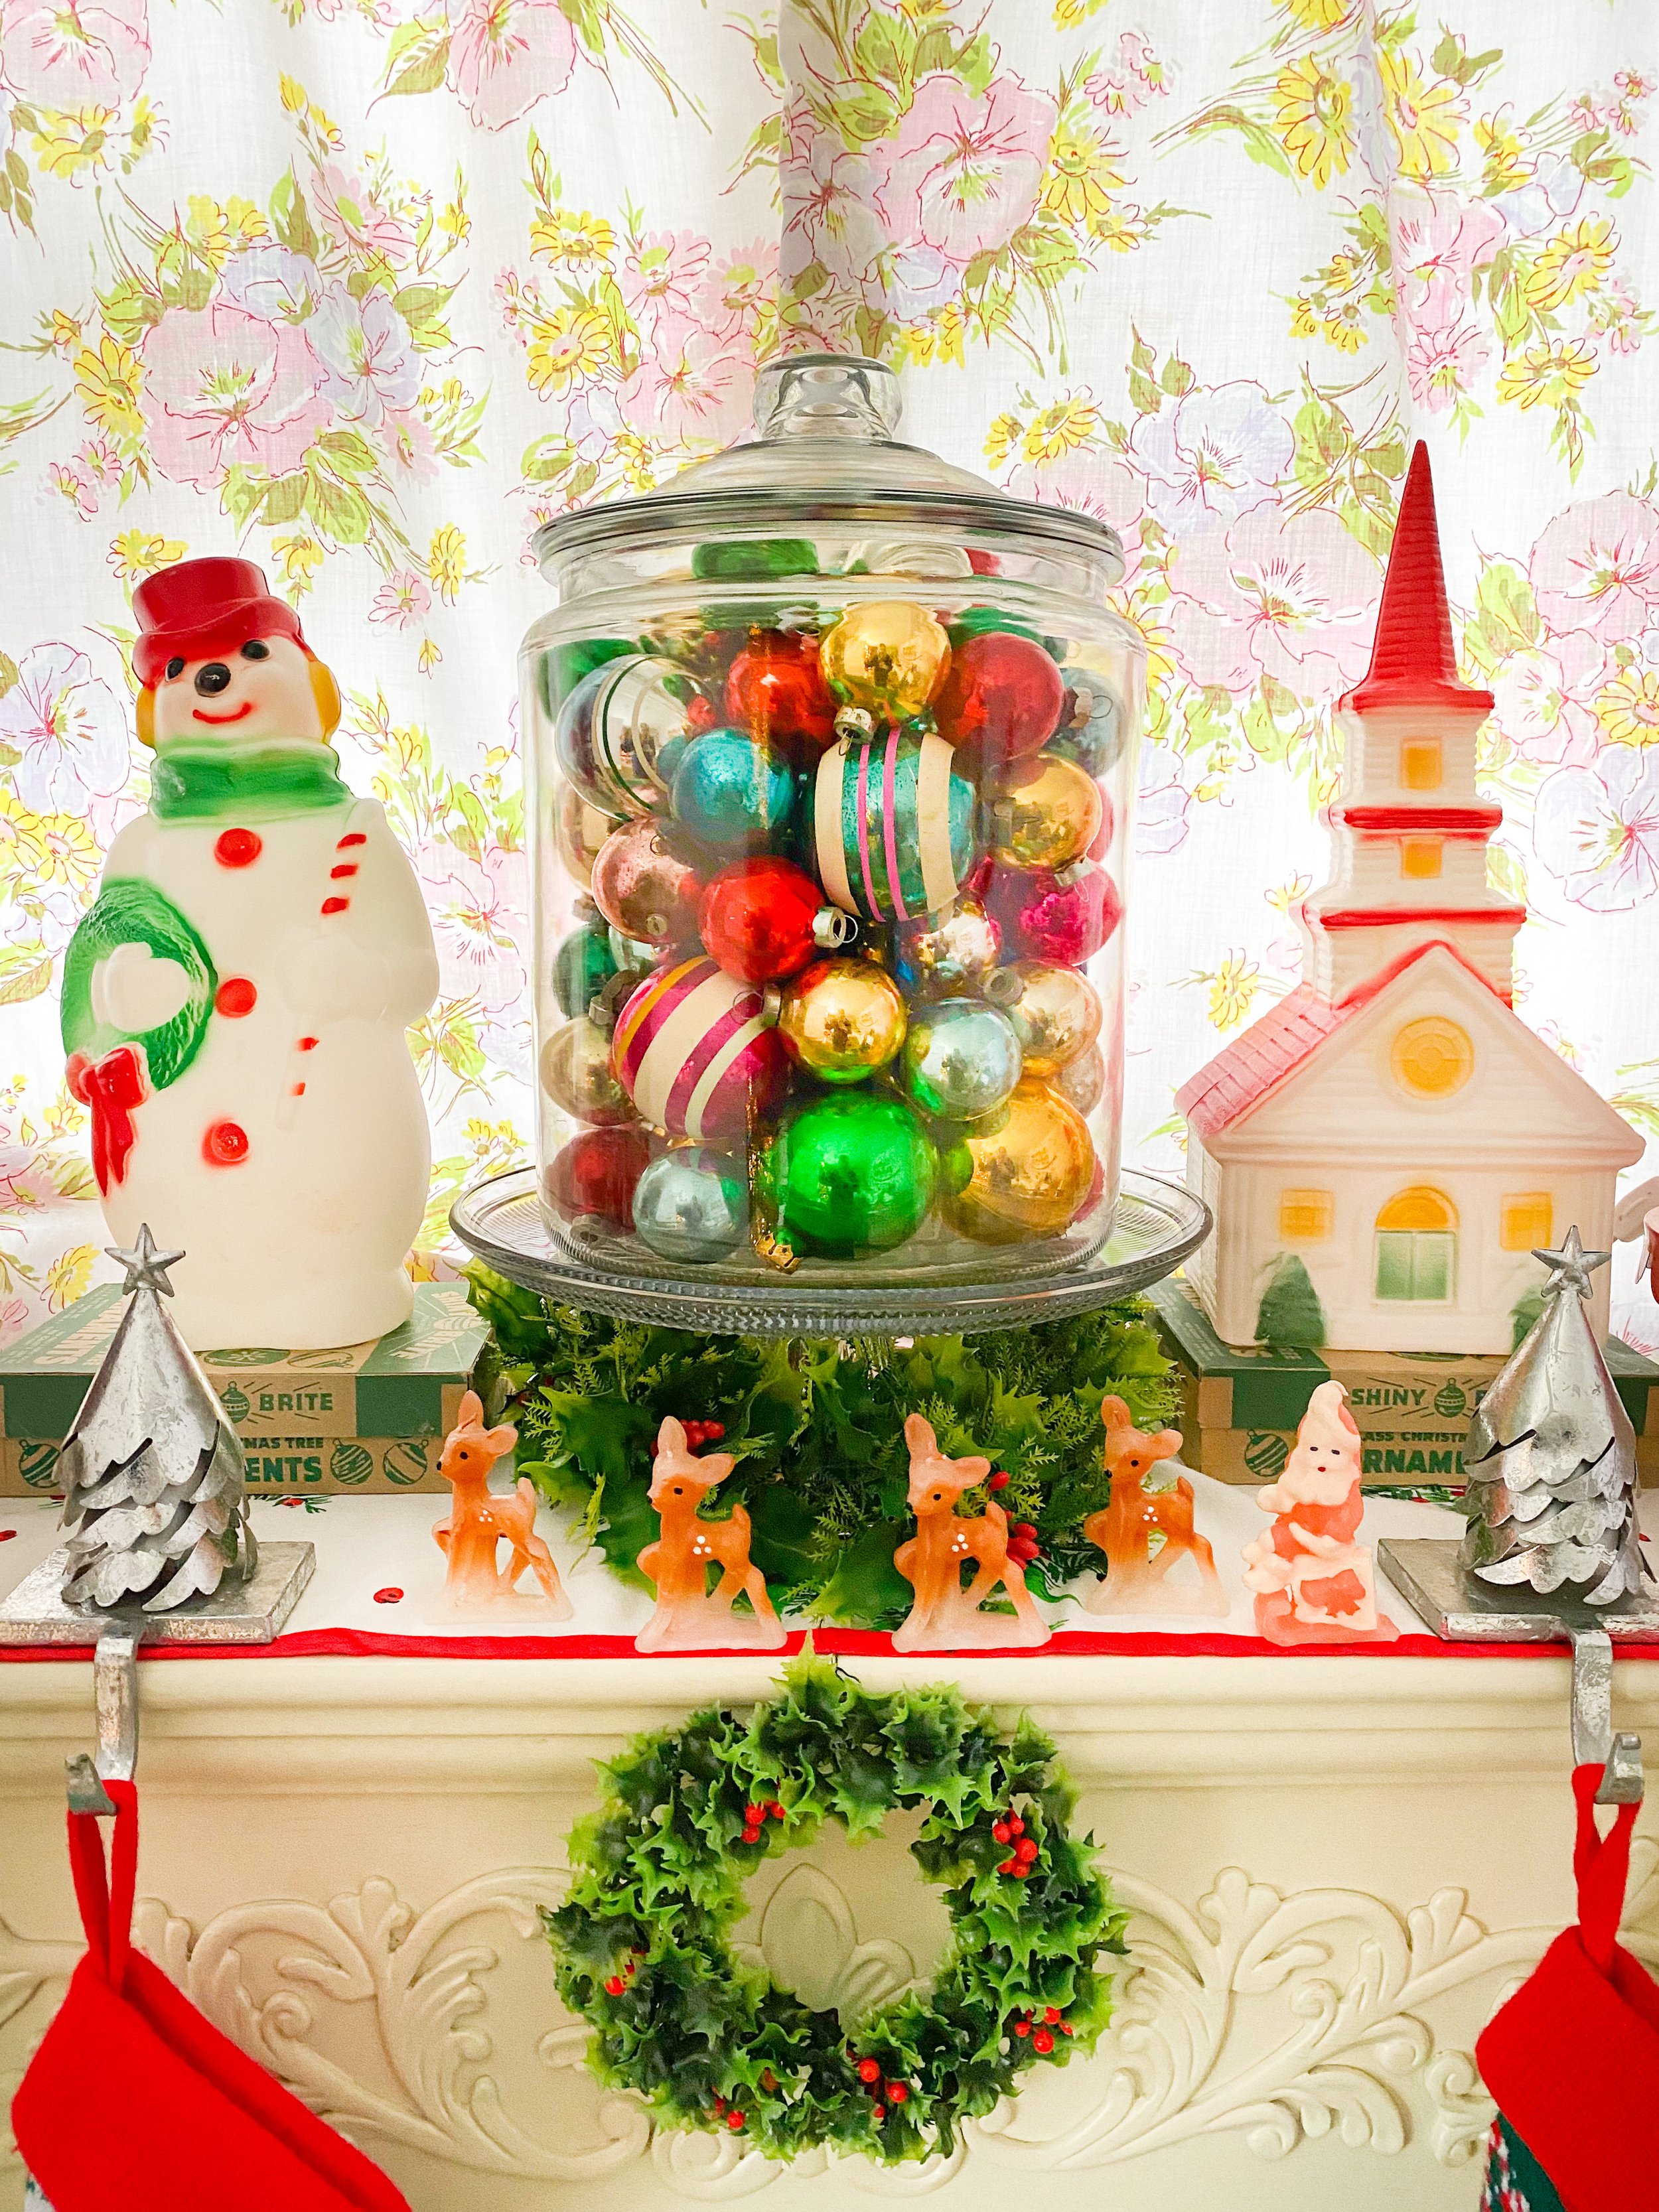 What Vintage Christmas Decorations are Worth Money? — Emily Retro - Vintage  and DIY Home Design